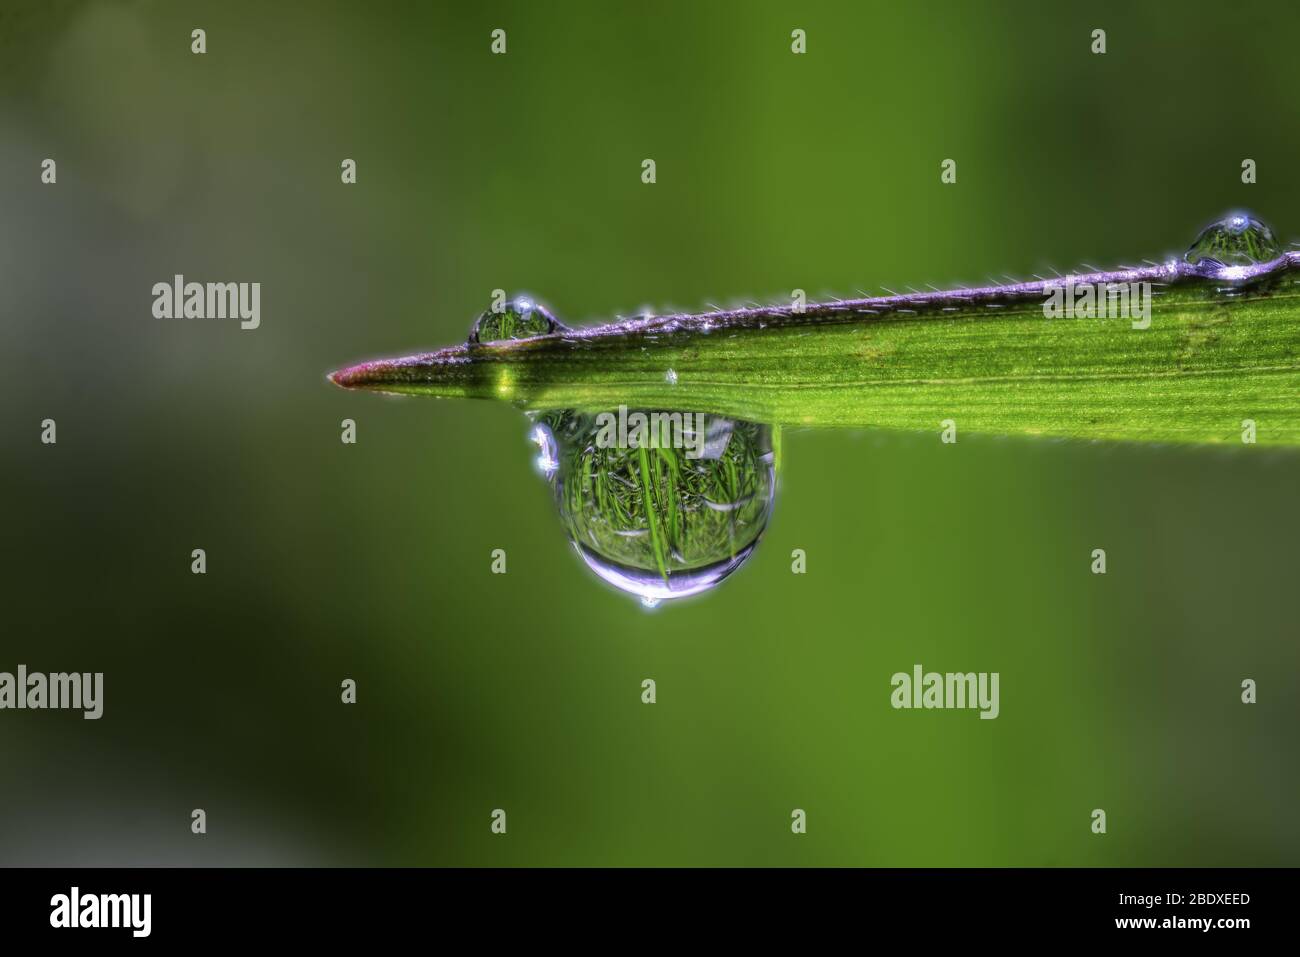 A Drop of Water shows inside the Inverted Image of the grass around the garden Stock Photo